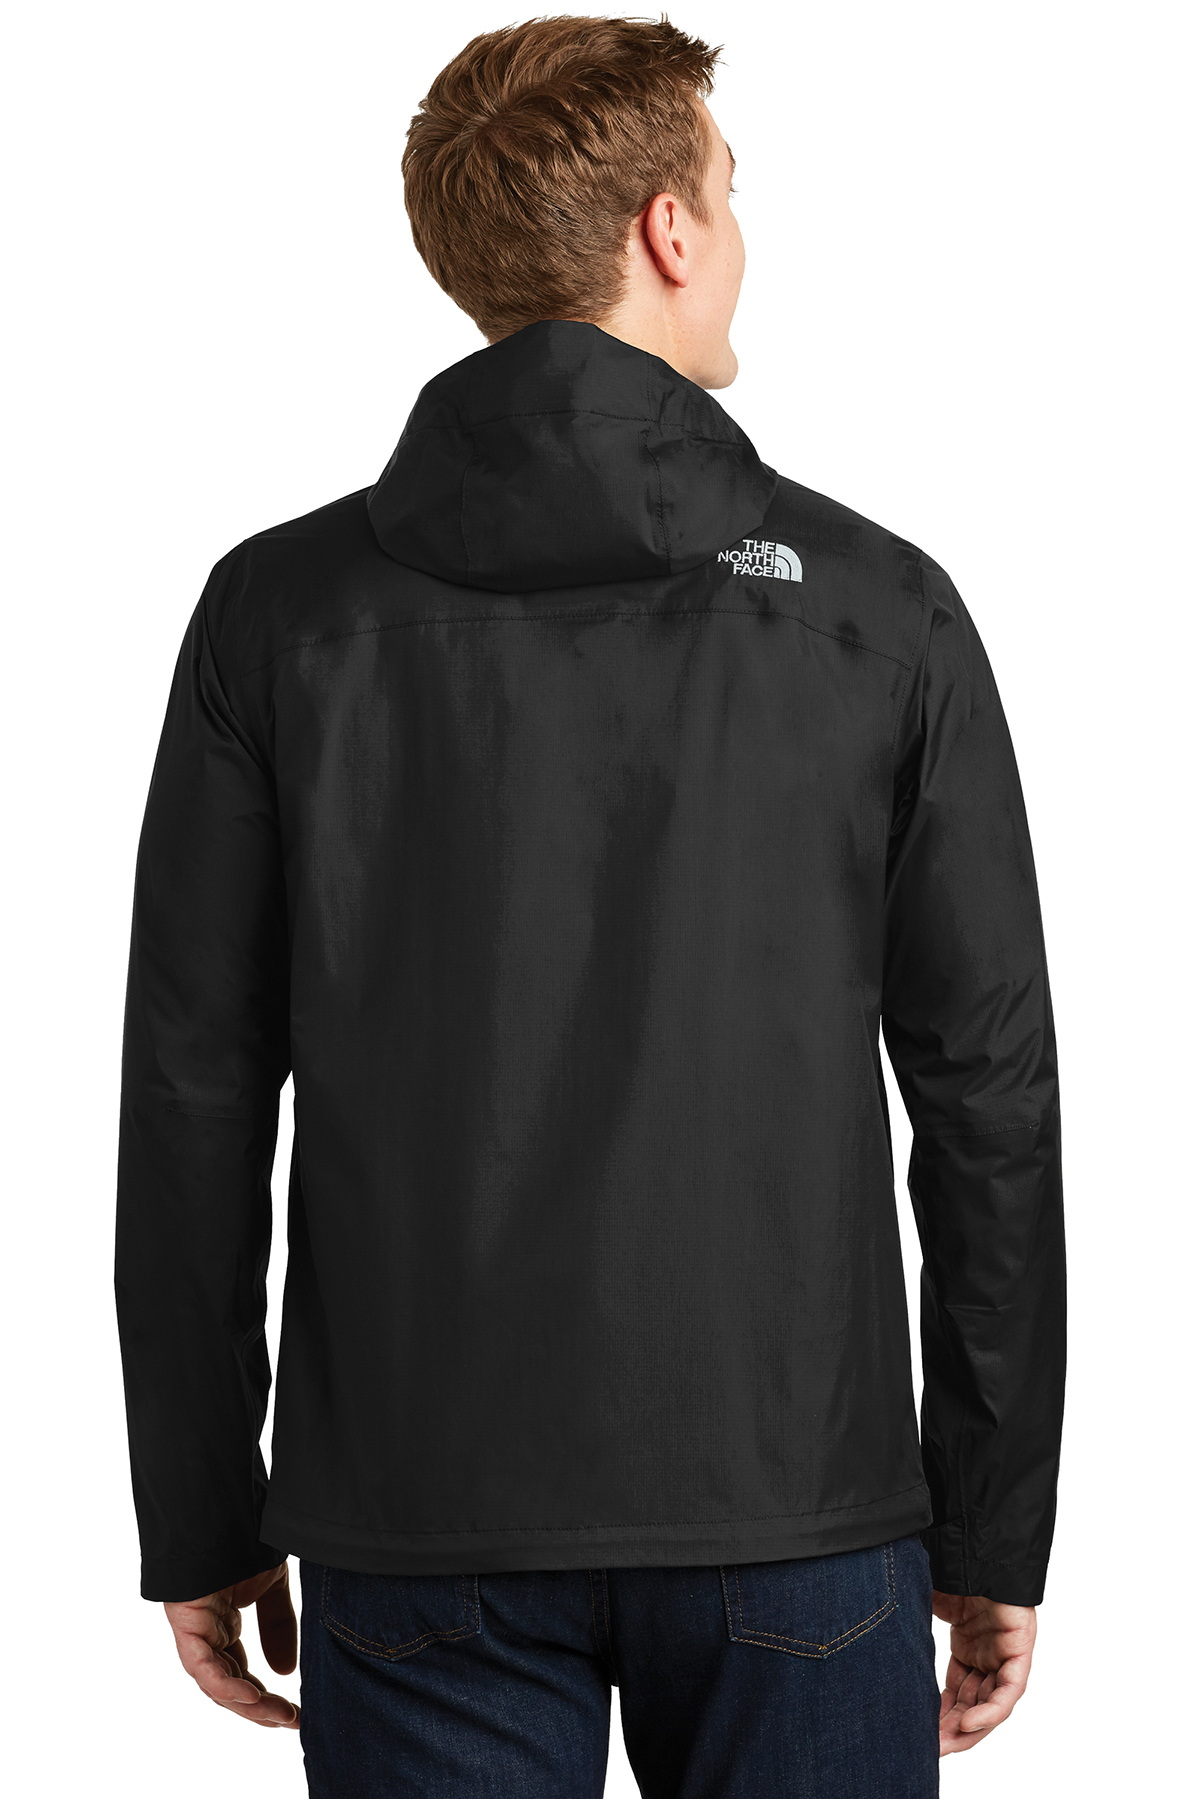 the north face dry vent